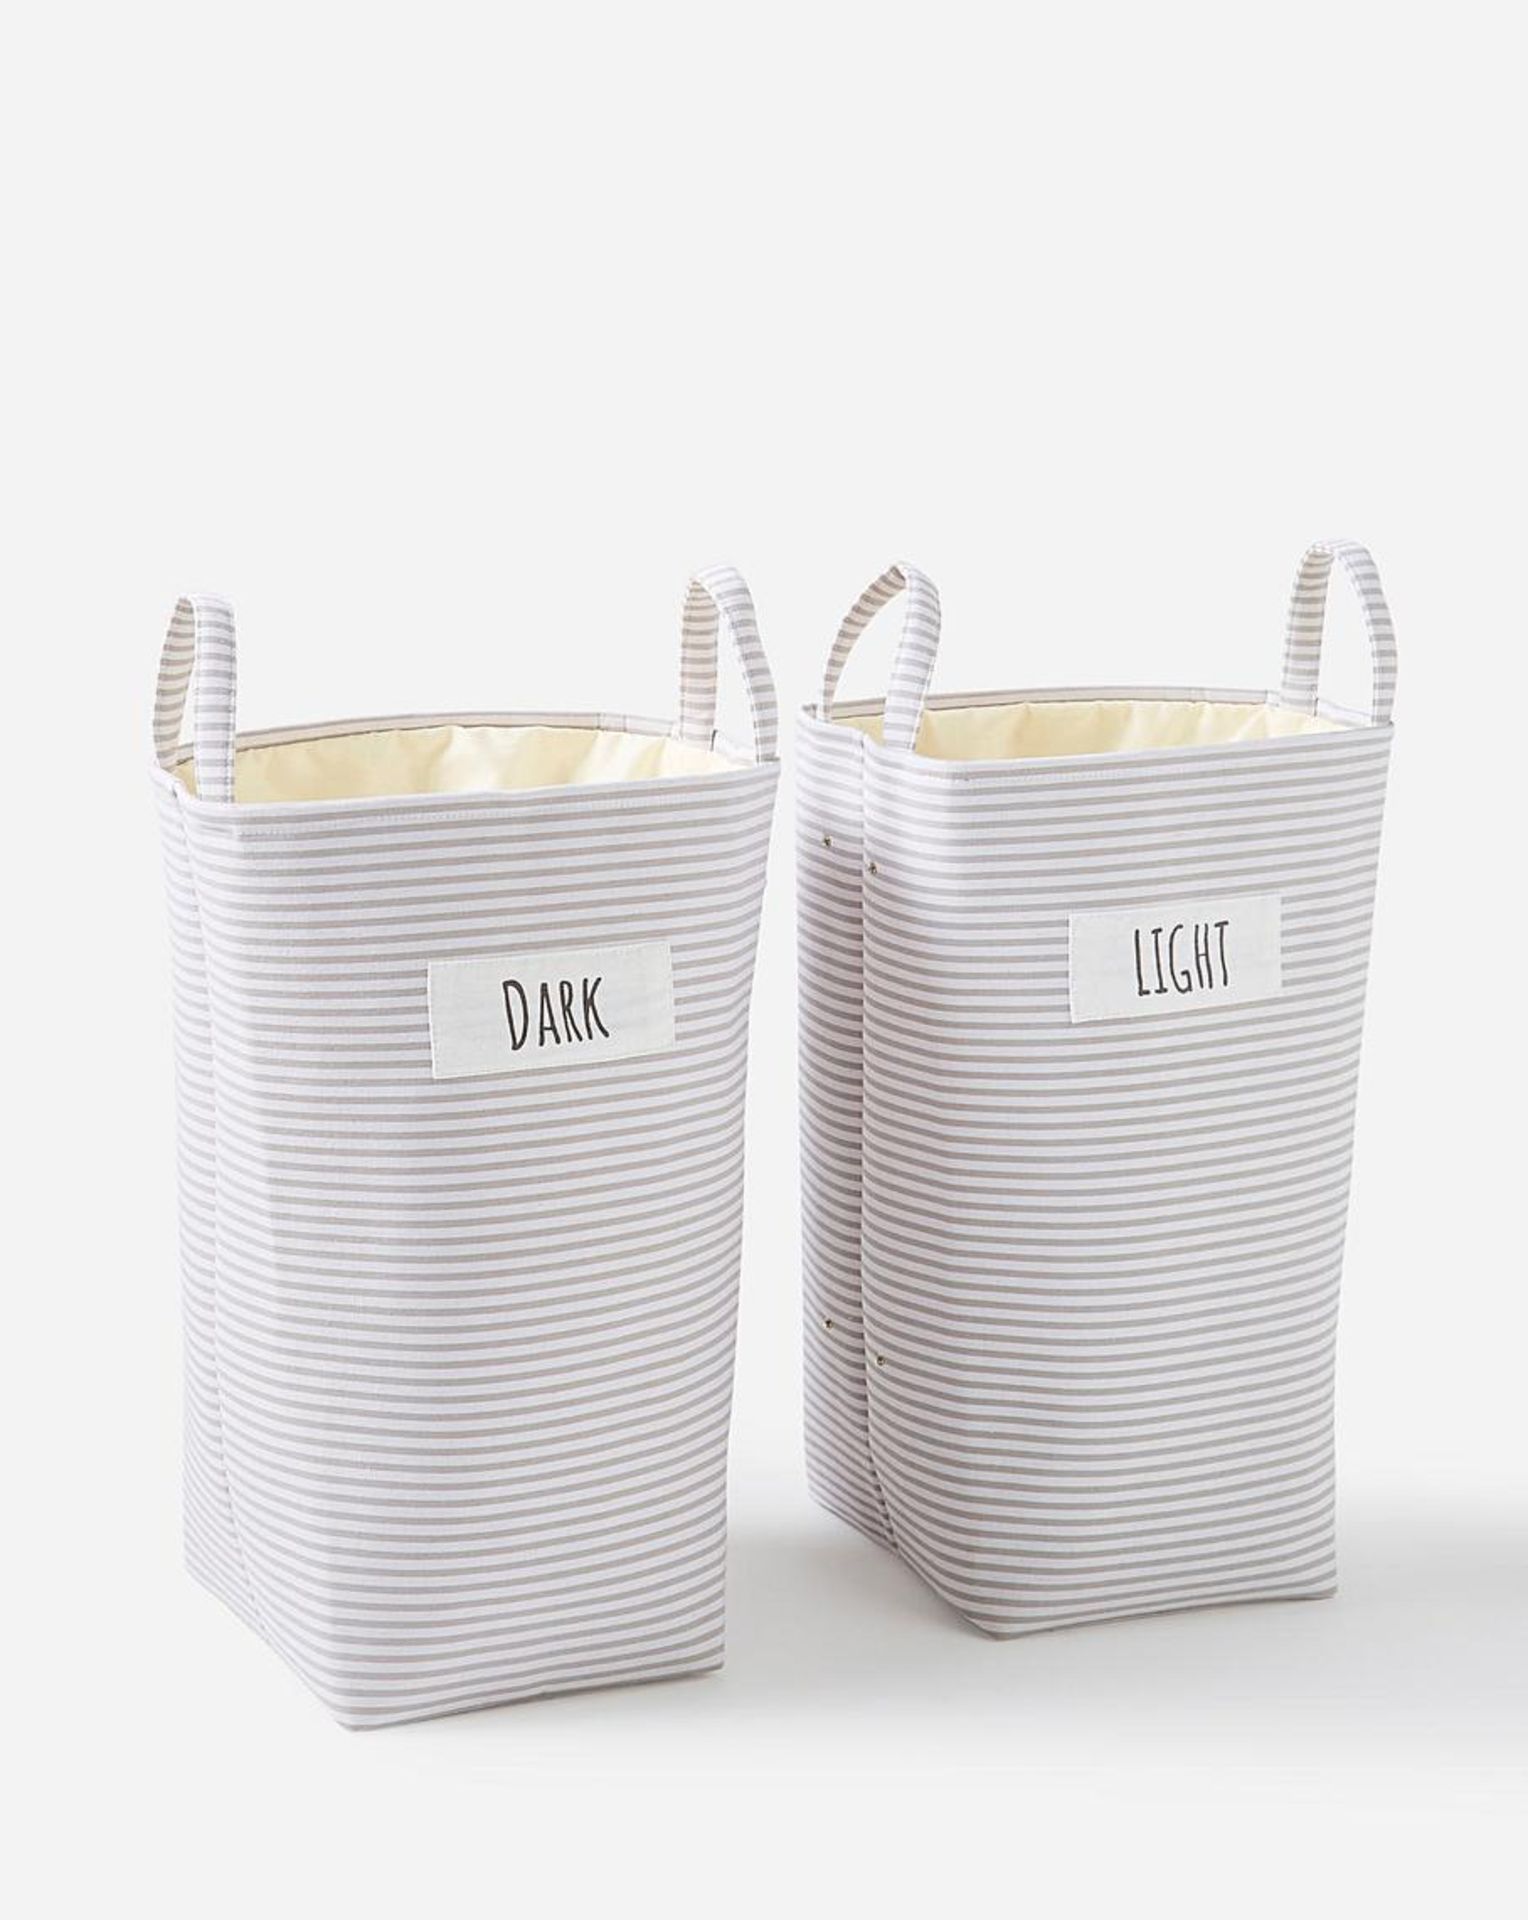 Stripe Laundry Bag Sorter. - SR4. This stripe laundry sorter comes with two sections, in a grey